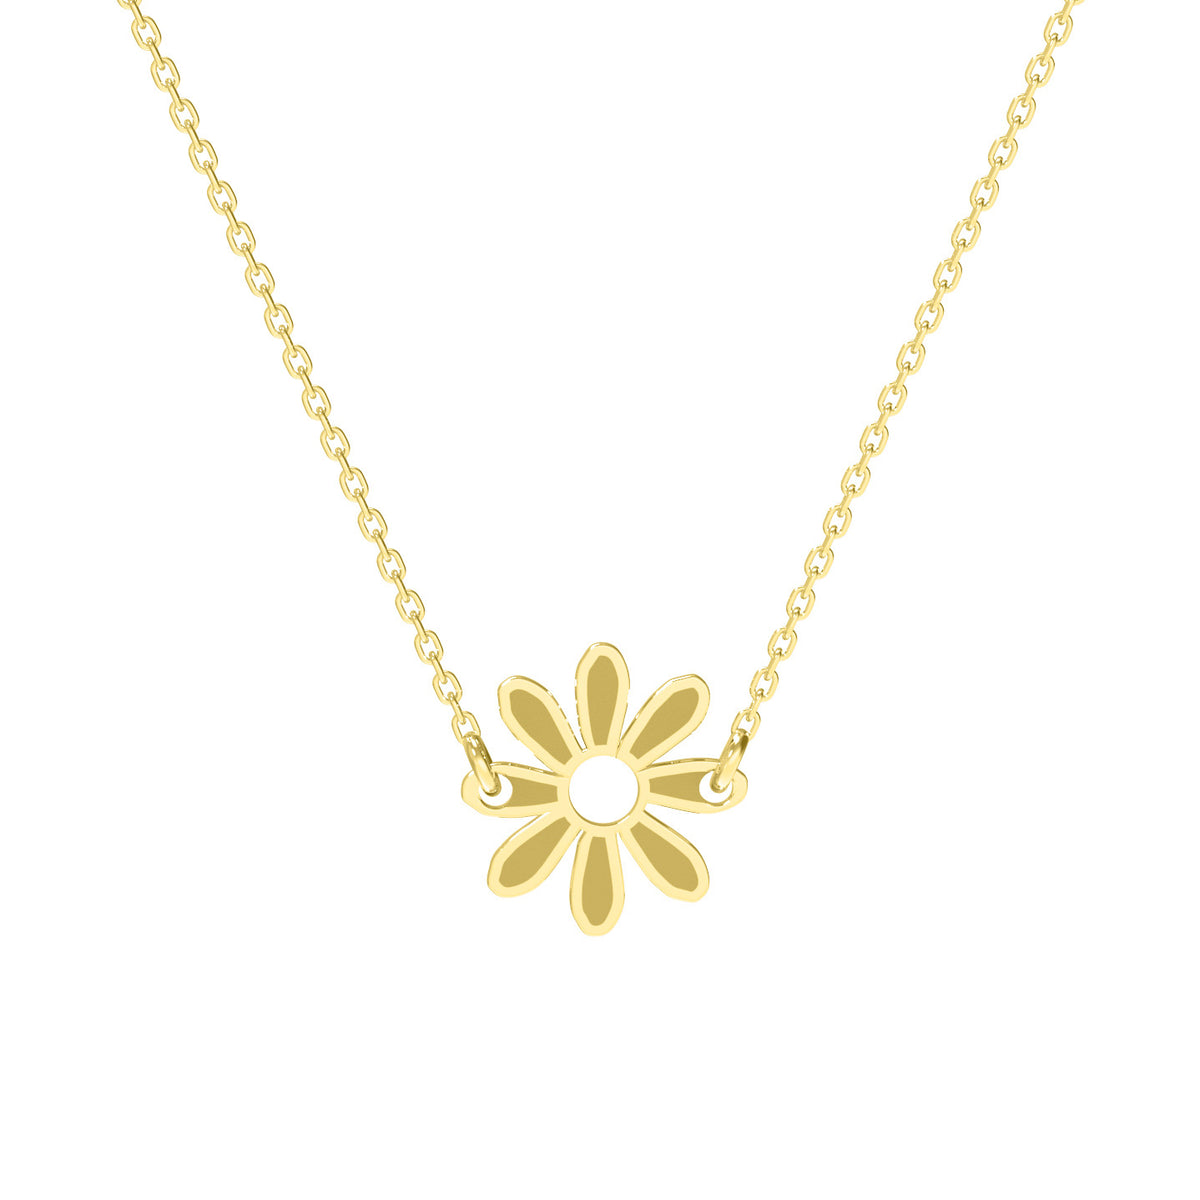 Little Flower Necklace, 18k gold plated silver